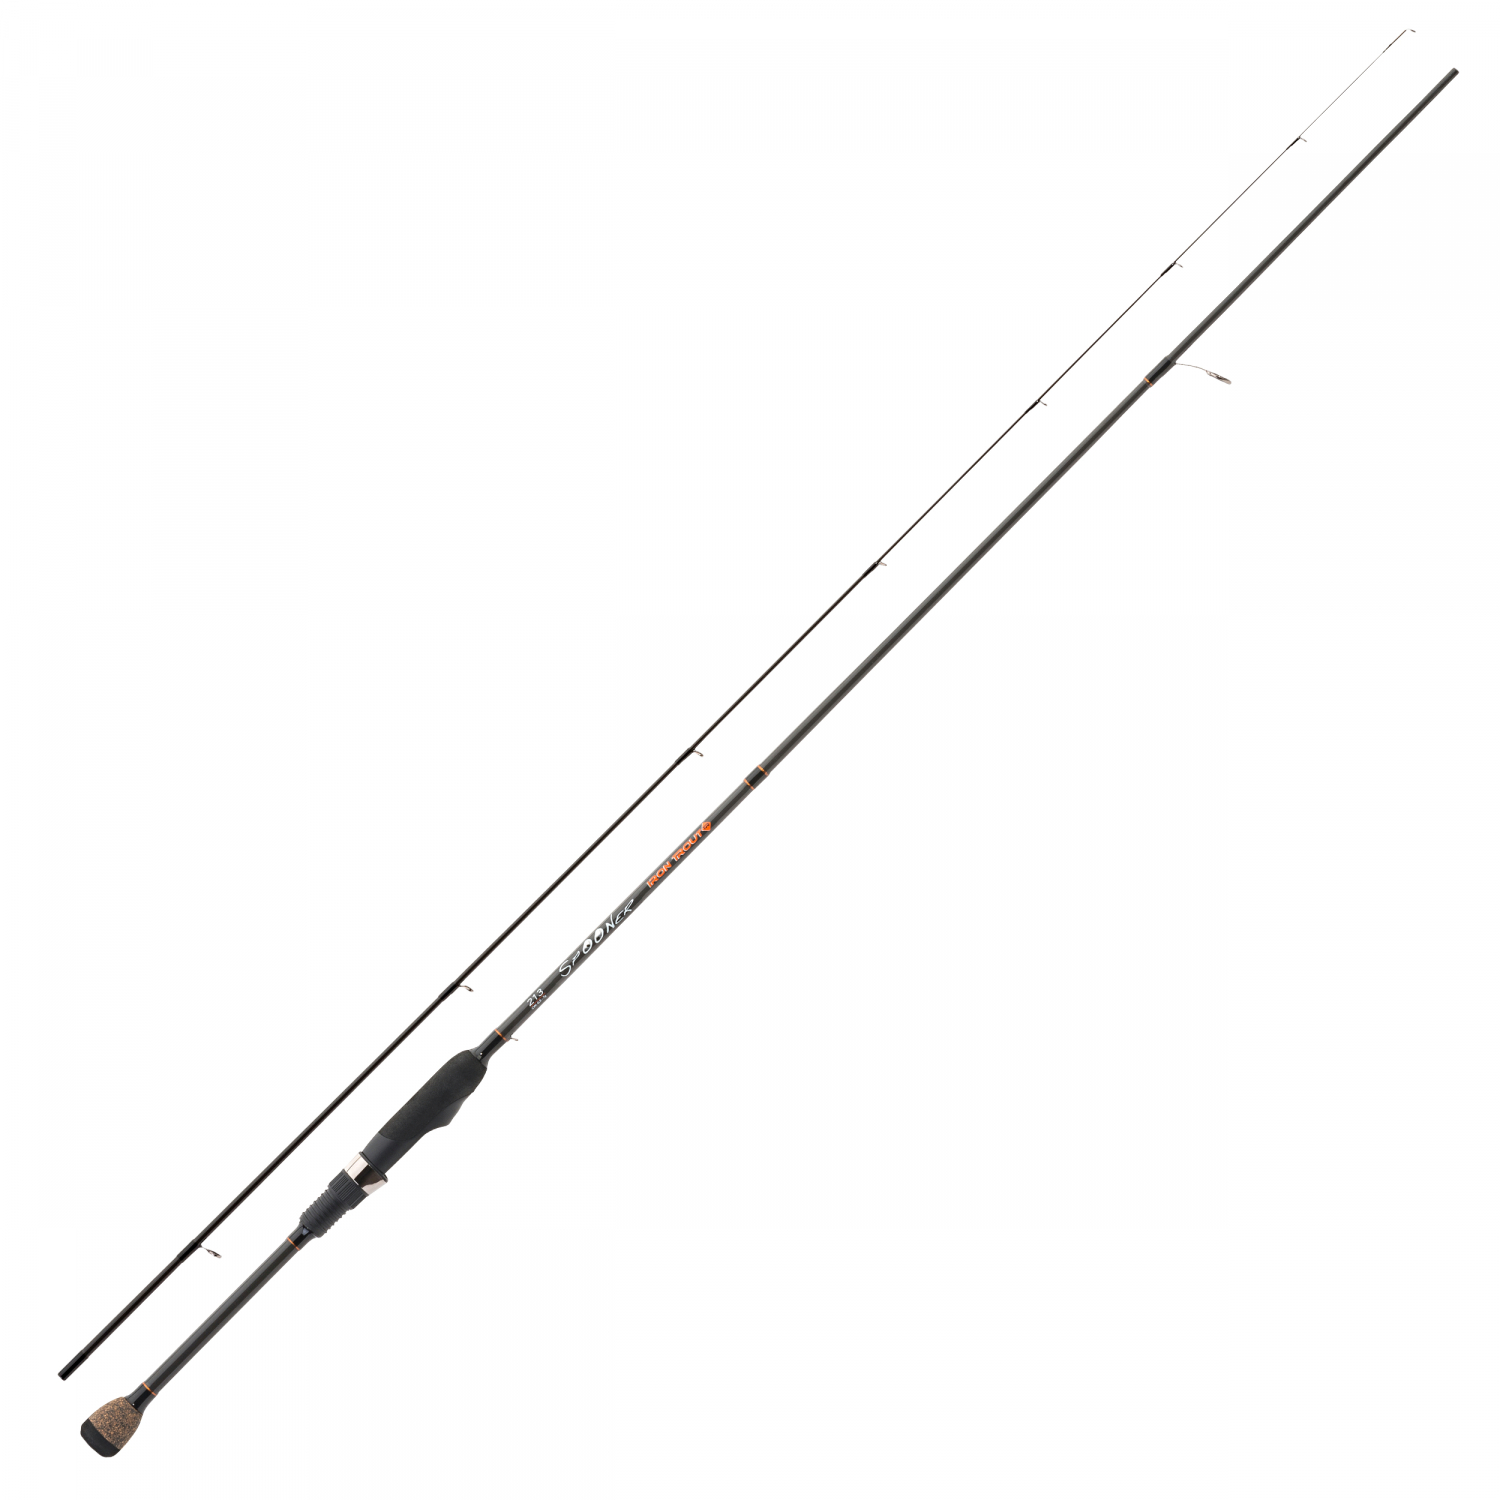 Iron Trout Trout Fishing Rod Spooner 